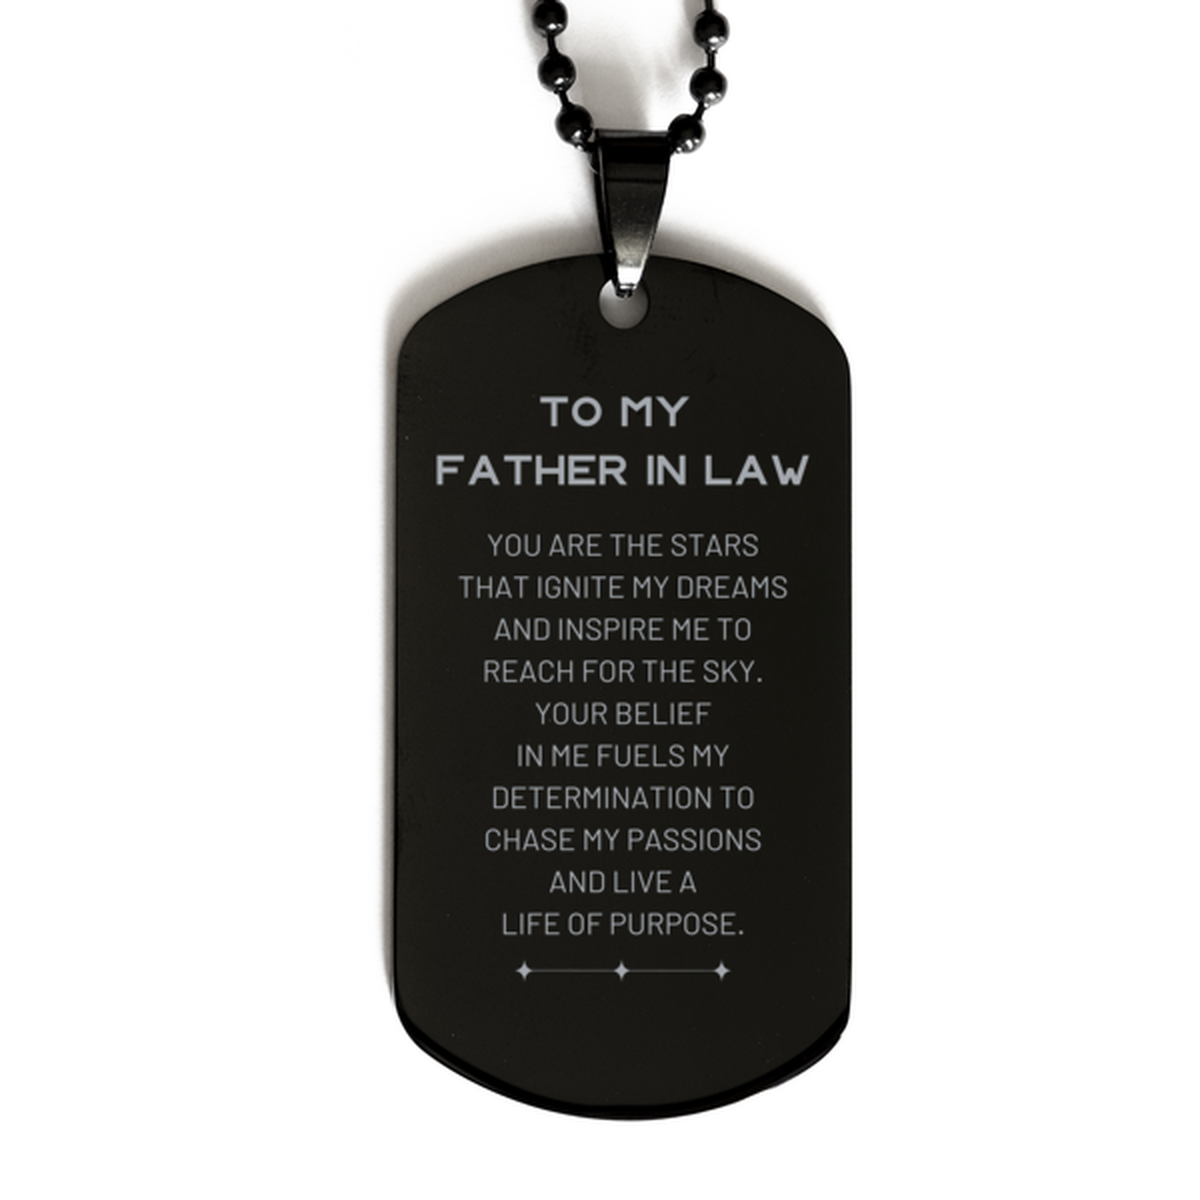 To My Father In Law Black Dog Tag, You are the stars that ignite my dreams and inspire me to reach for the sky, Birthday Unique Gifts For Father In Law, Thank You Gifts For Father In Law